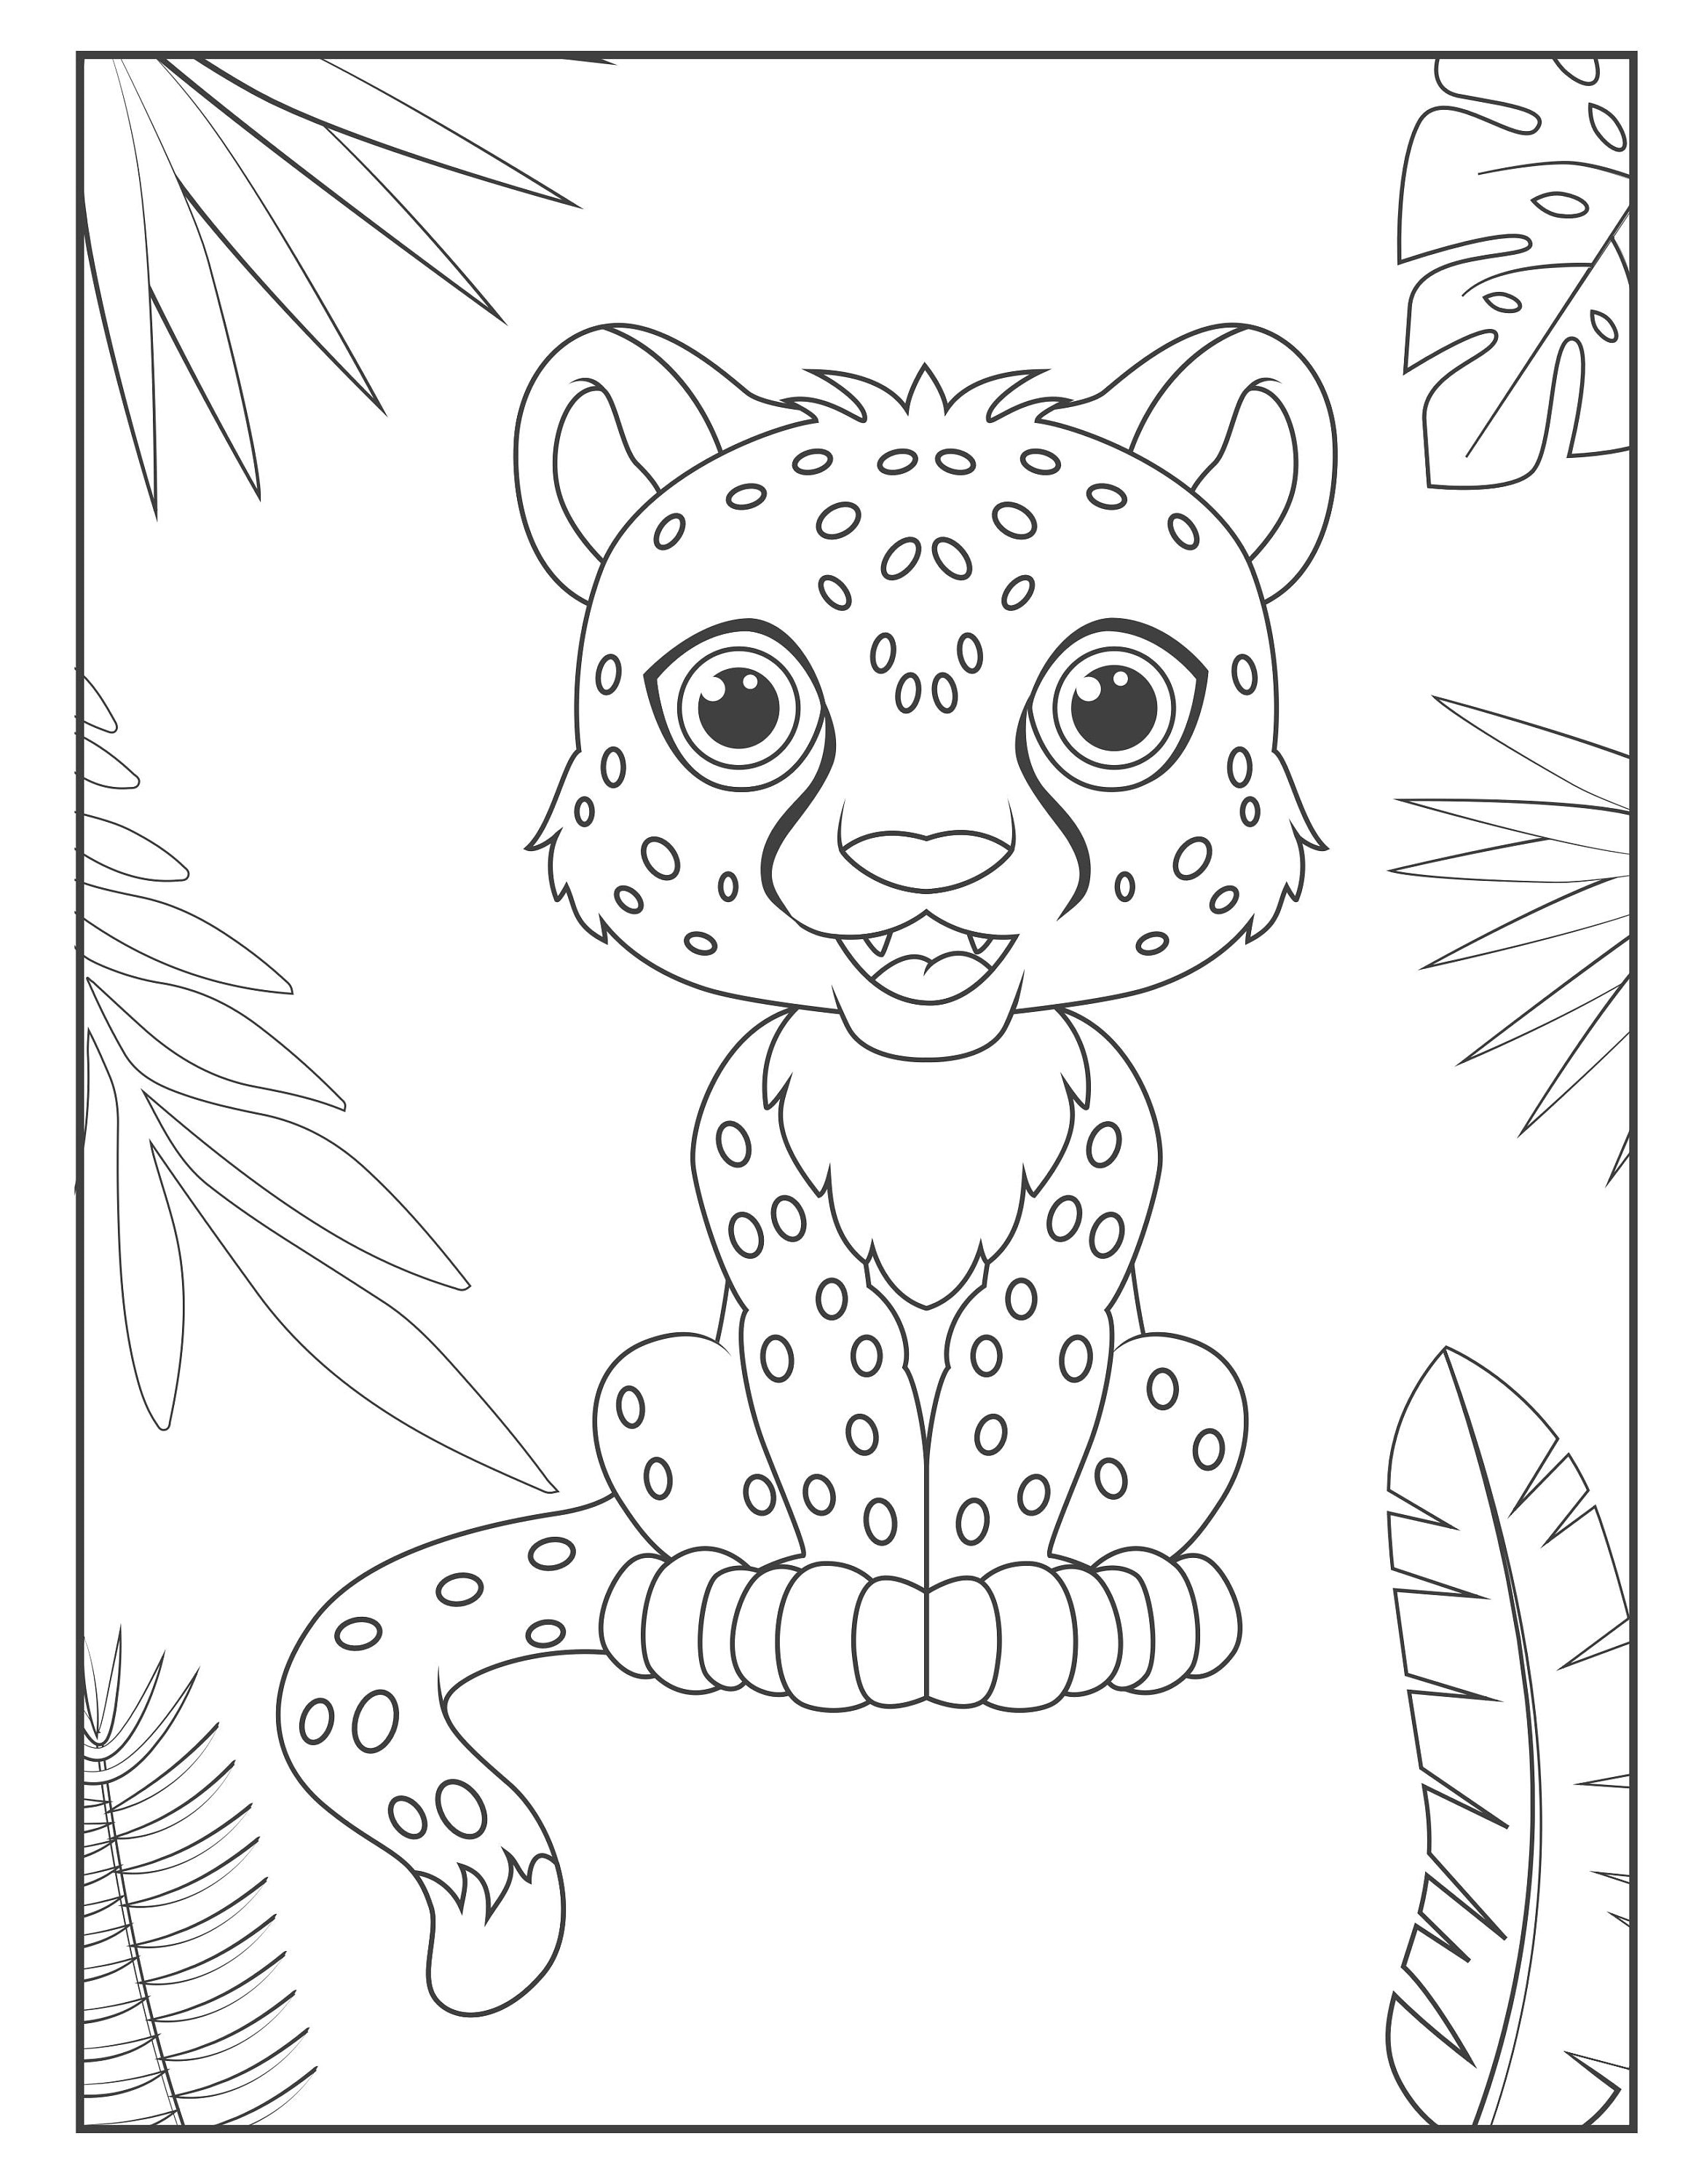 21 Cheetah Coloring Pages - Etsy